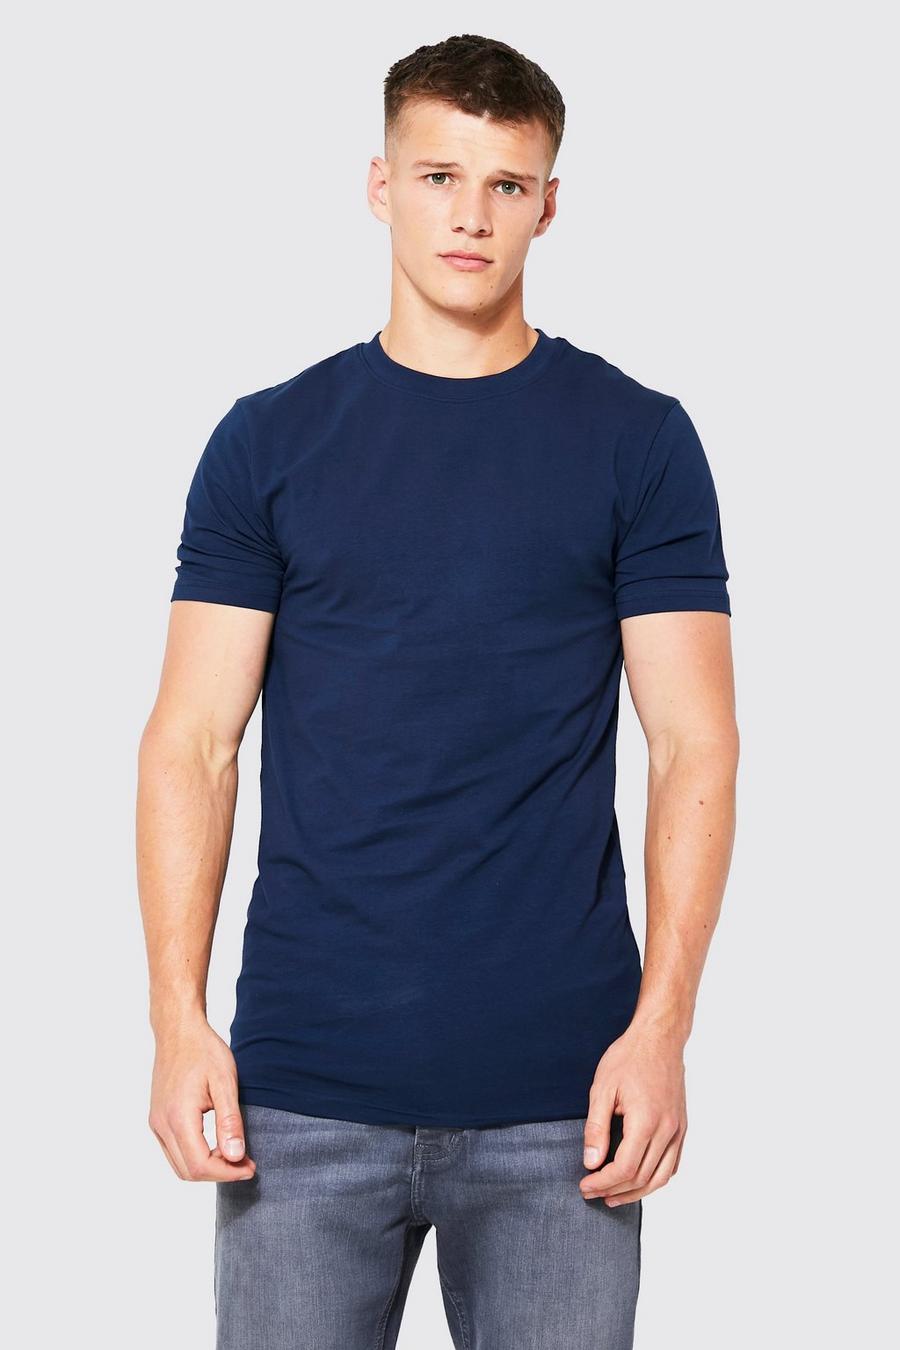 Navy Tall Muscle Fit Basic Crew Neck T-shirt